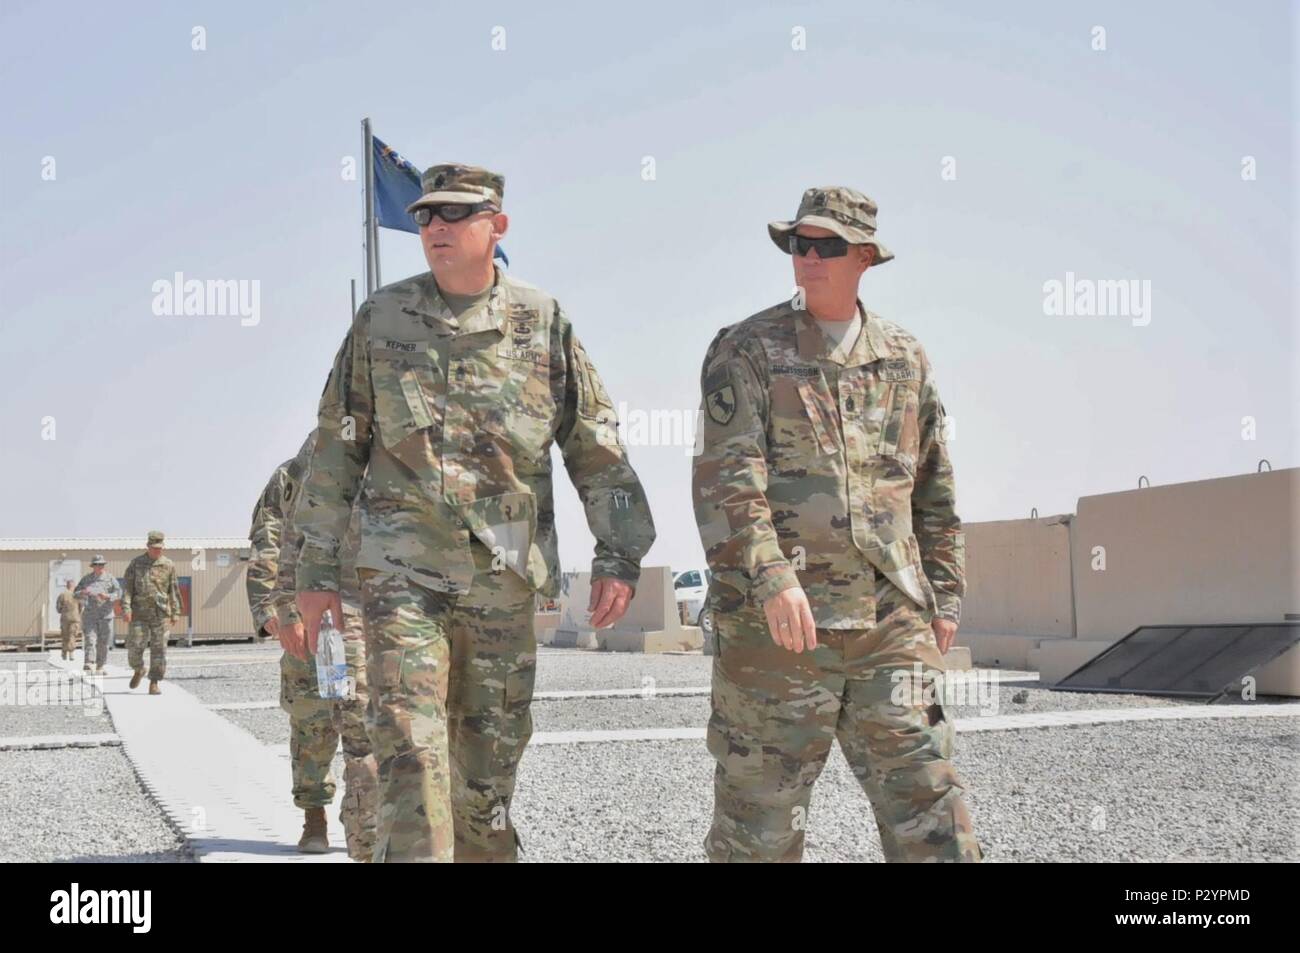 Command Sgt. Maj. Christopher S. Kepner, left, the 11th sergeant major of the Army National Guard, receives a guided tour of the 17th Sustainment Brigade’s area of operations on Camp Arifjan, Kuwait from Command Sgt. Maj. James Richardson, the senior enlisted advisor of the 17th SB, 1st Sustainment Command (Theater) August 10, 2016. Kepner’s tour was part of a multi-day visit to National Guard Soldiers in Southwest Asia. (U.S. Army National Guard photo by Sgt. Walter H. Lowell) Stock Photo